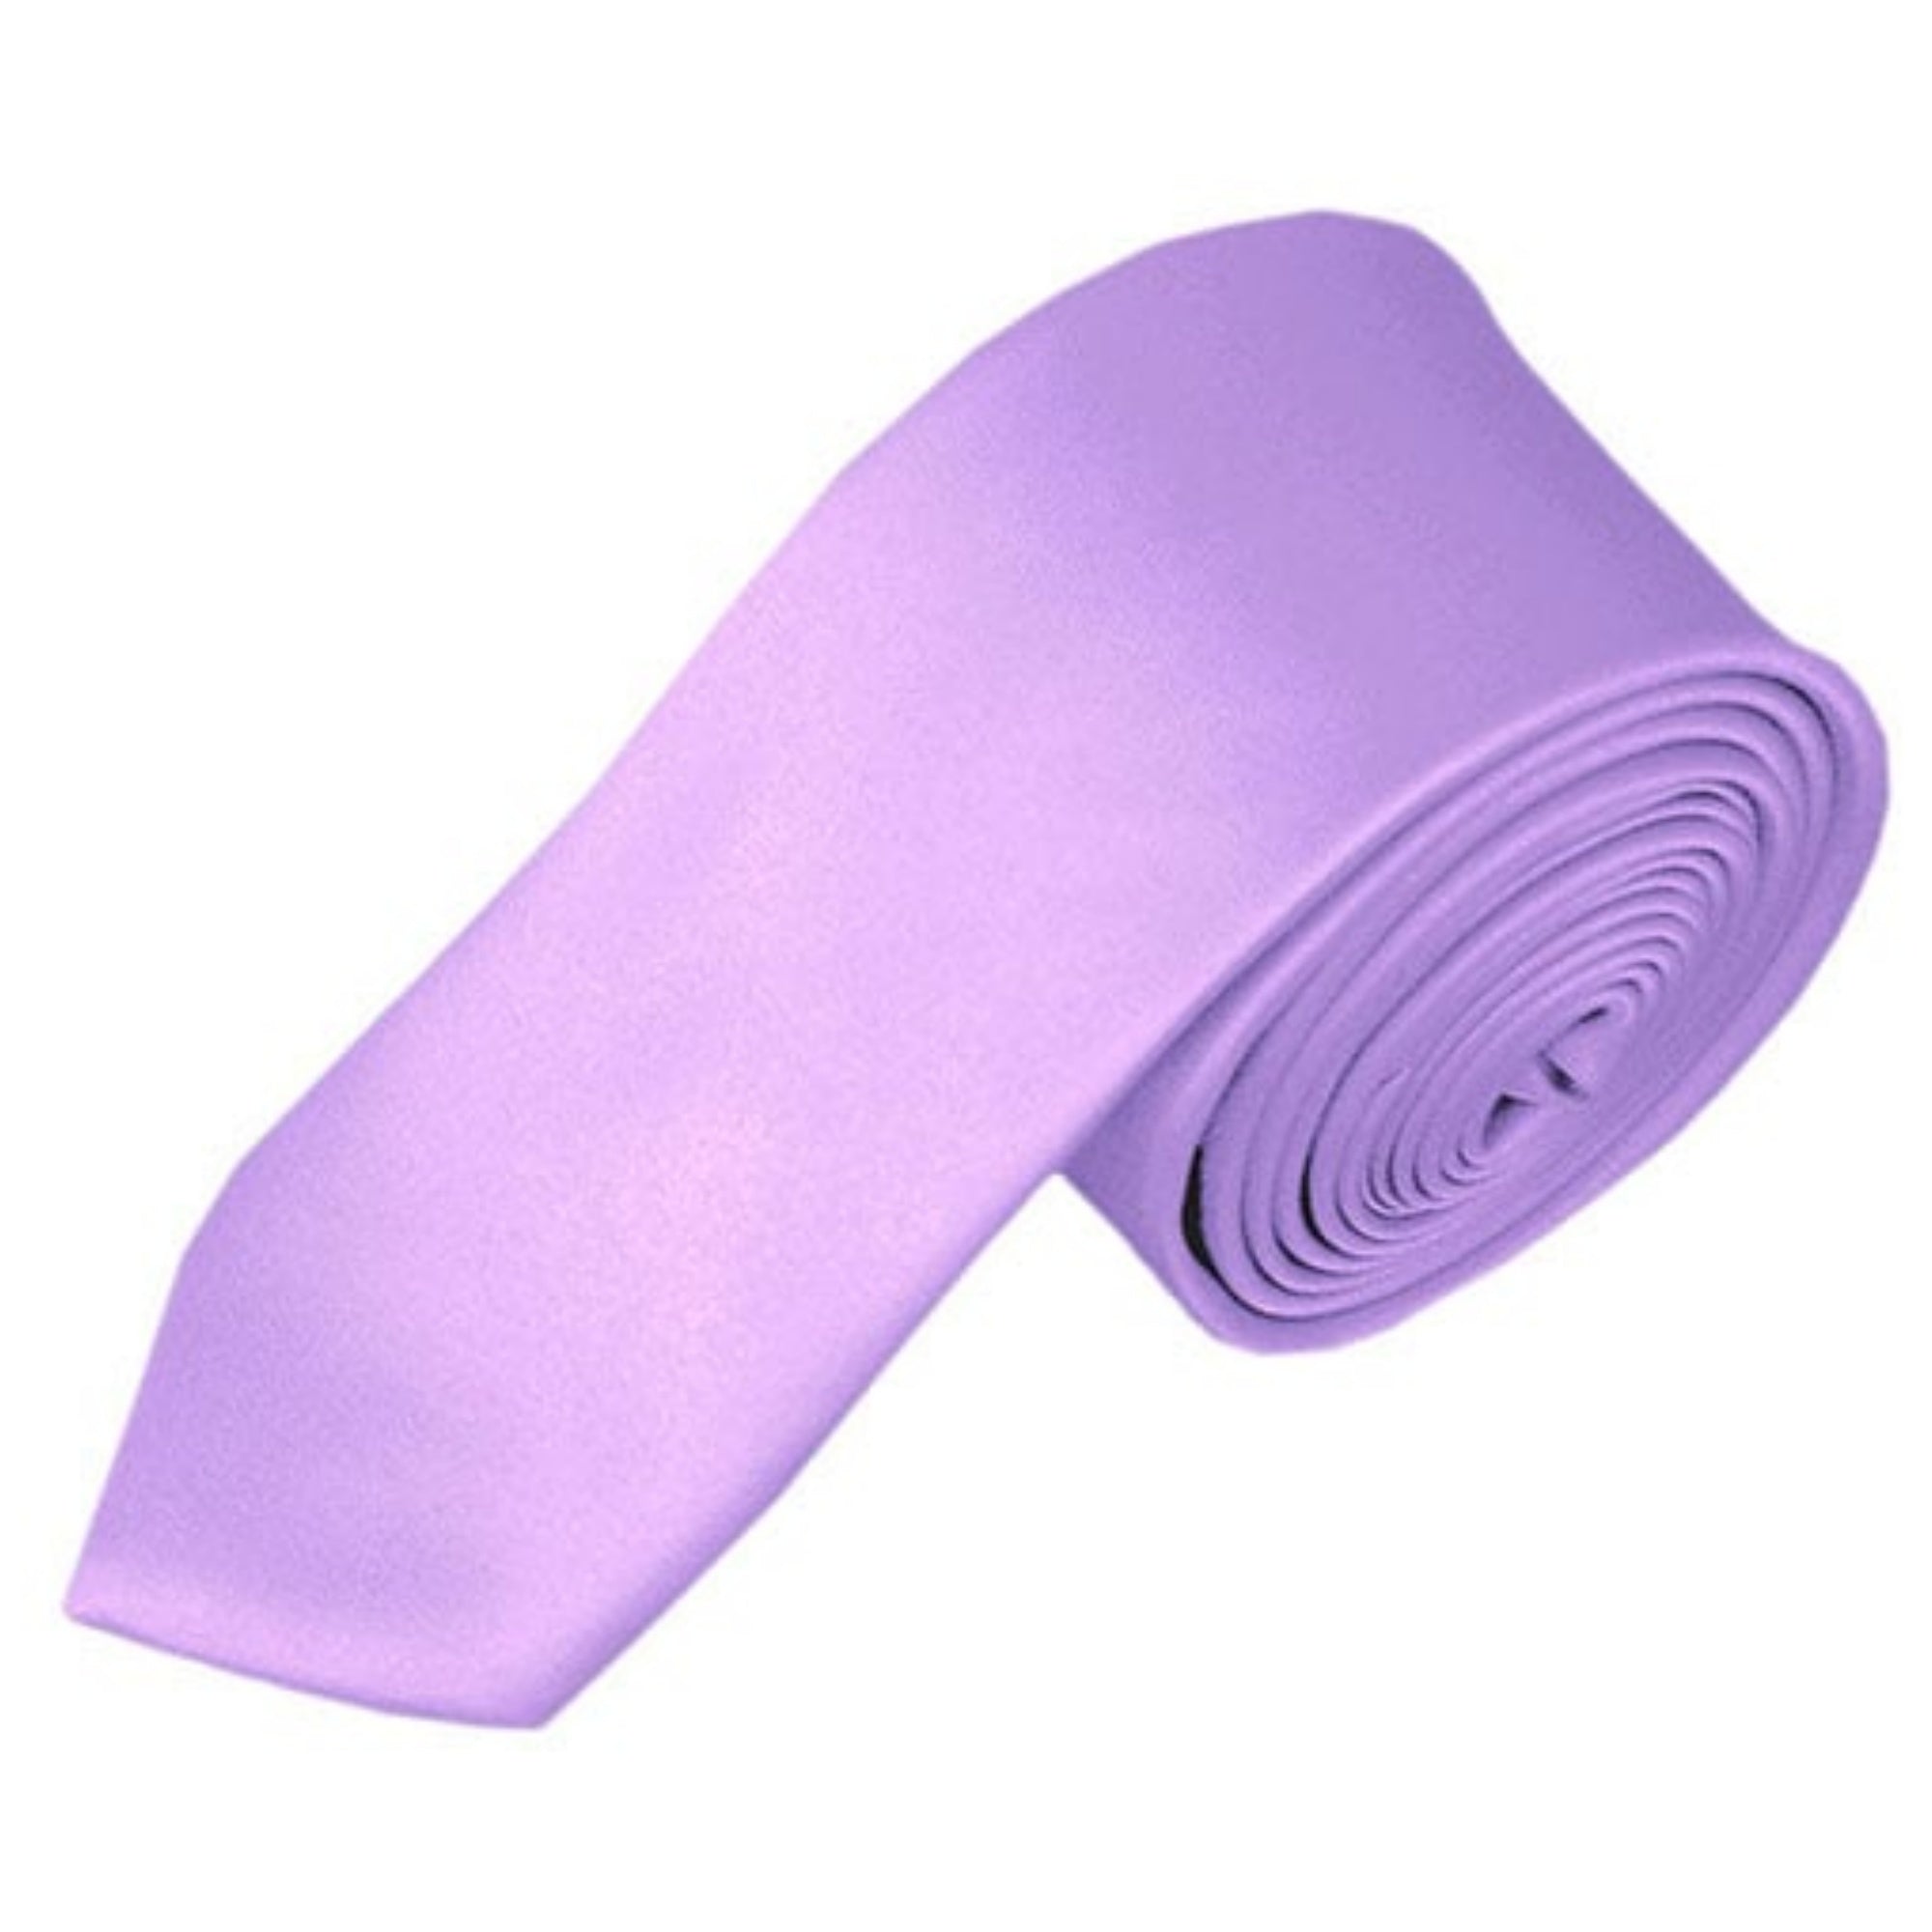 TheDapperTie Boy's Solid Color 2.75 Inch Wide And 48 Inch Long Neckties Neck Tie TheDapperTie Lavender  